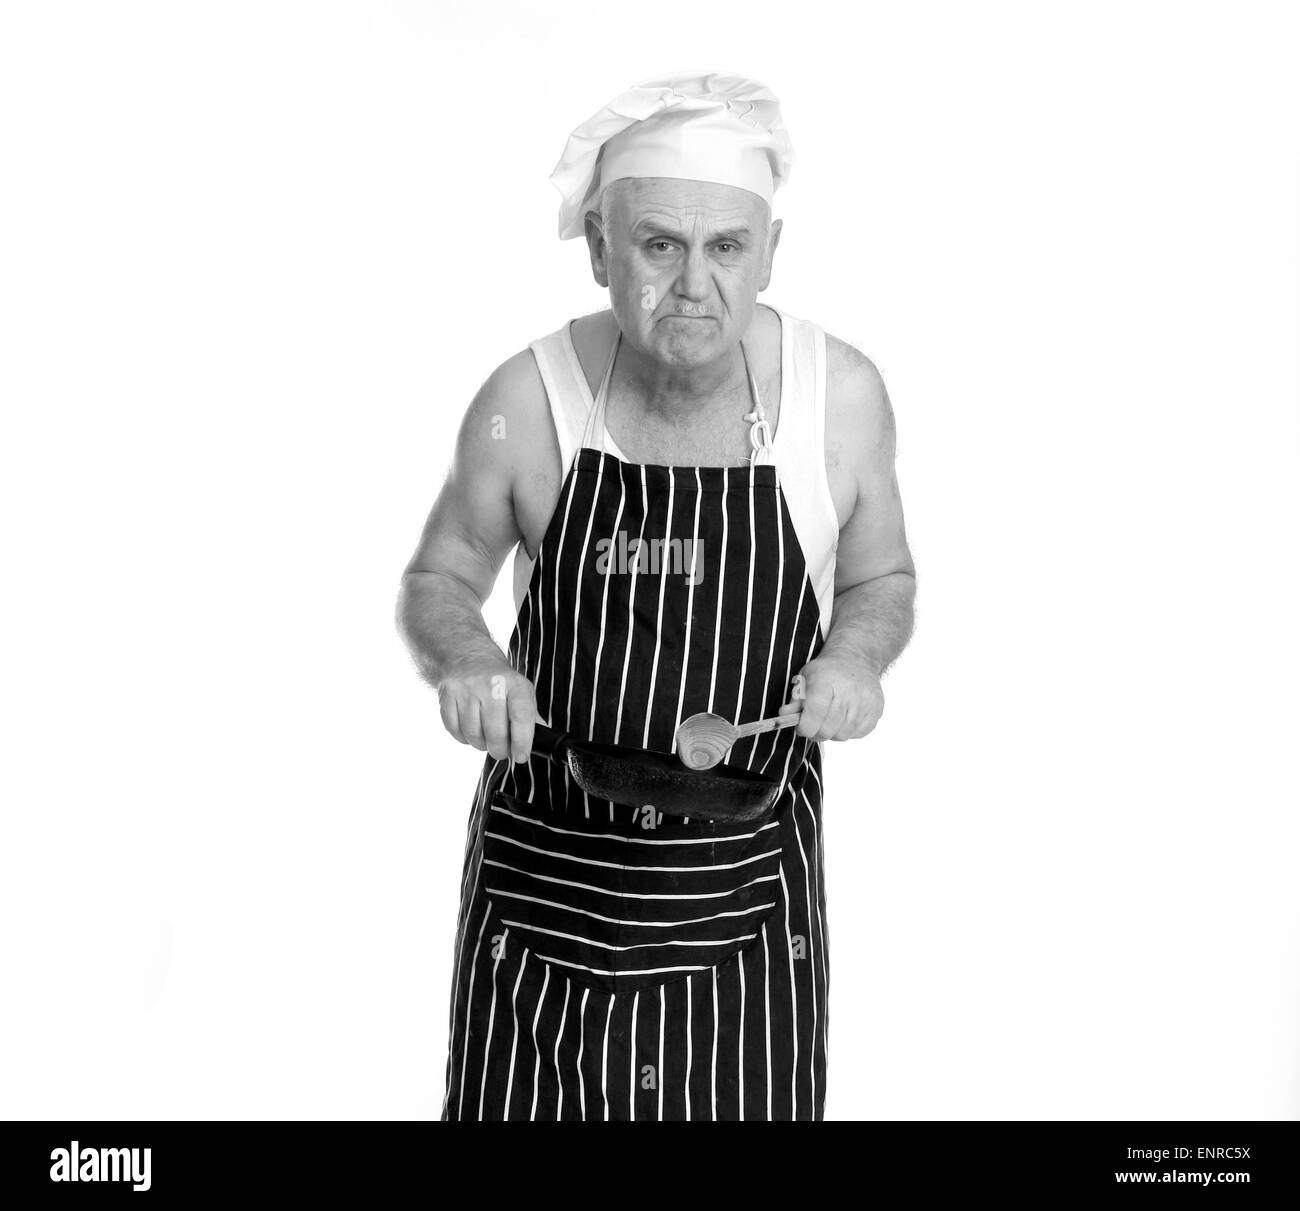 Grumpy foul tempered man as a low grade chef or cook in a greasy spoon Cafe, Stock Photo